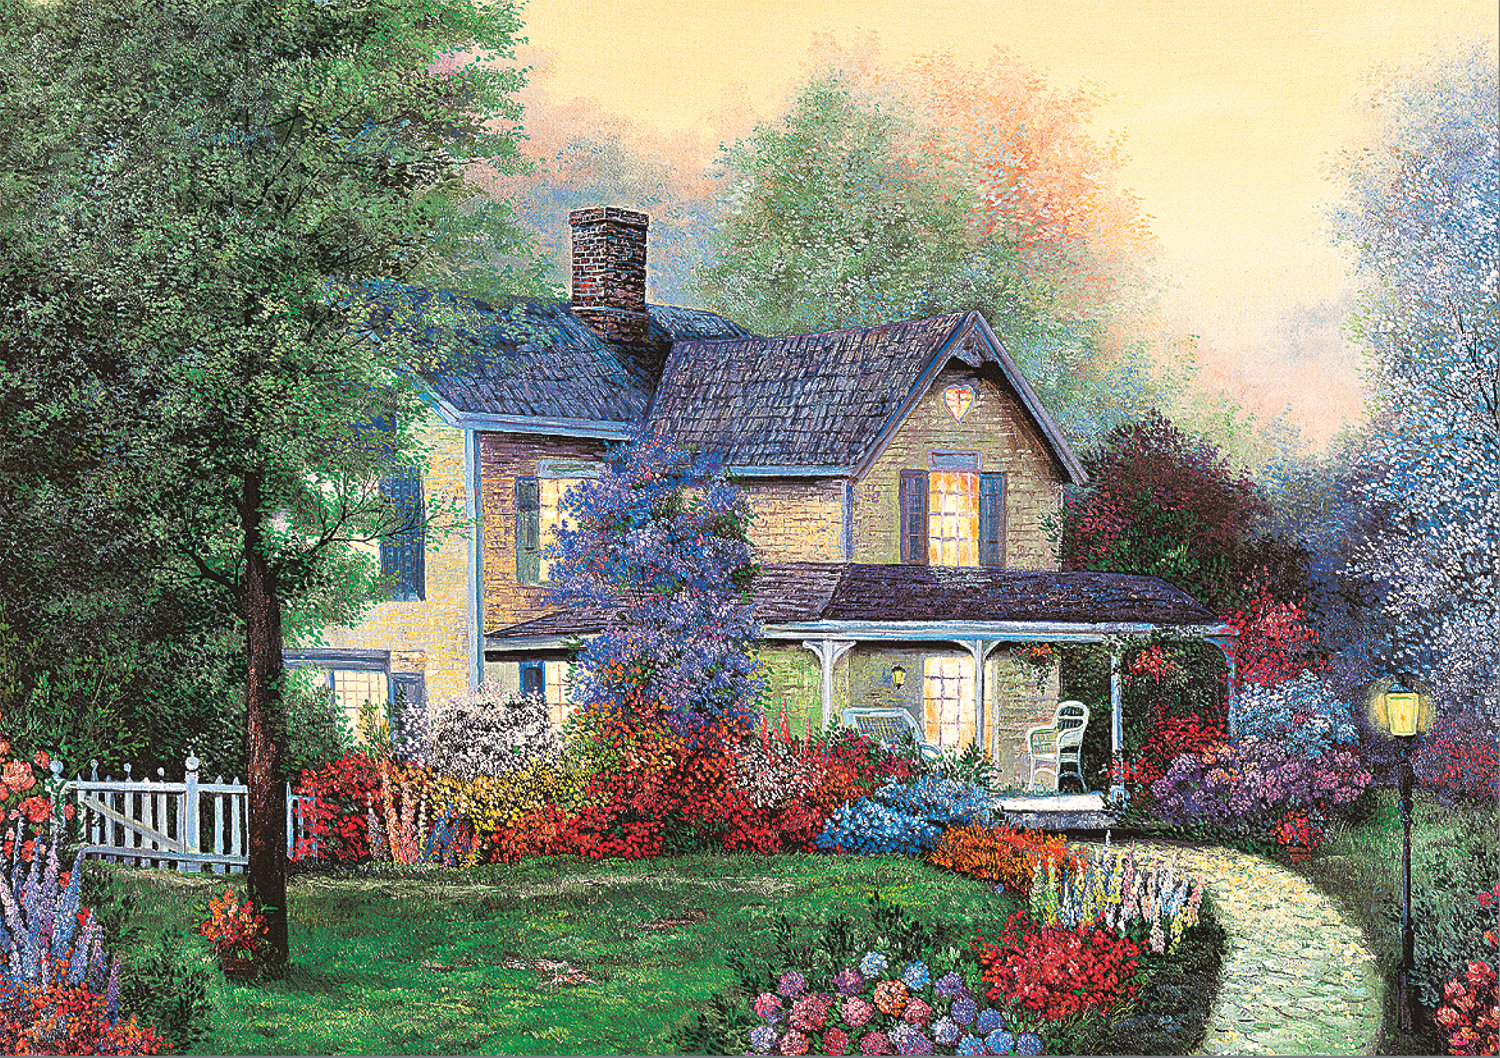 The Dream Flower Garden Countryside Jigsaw Puzzle